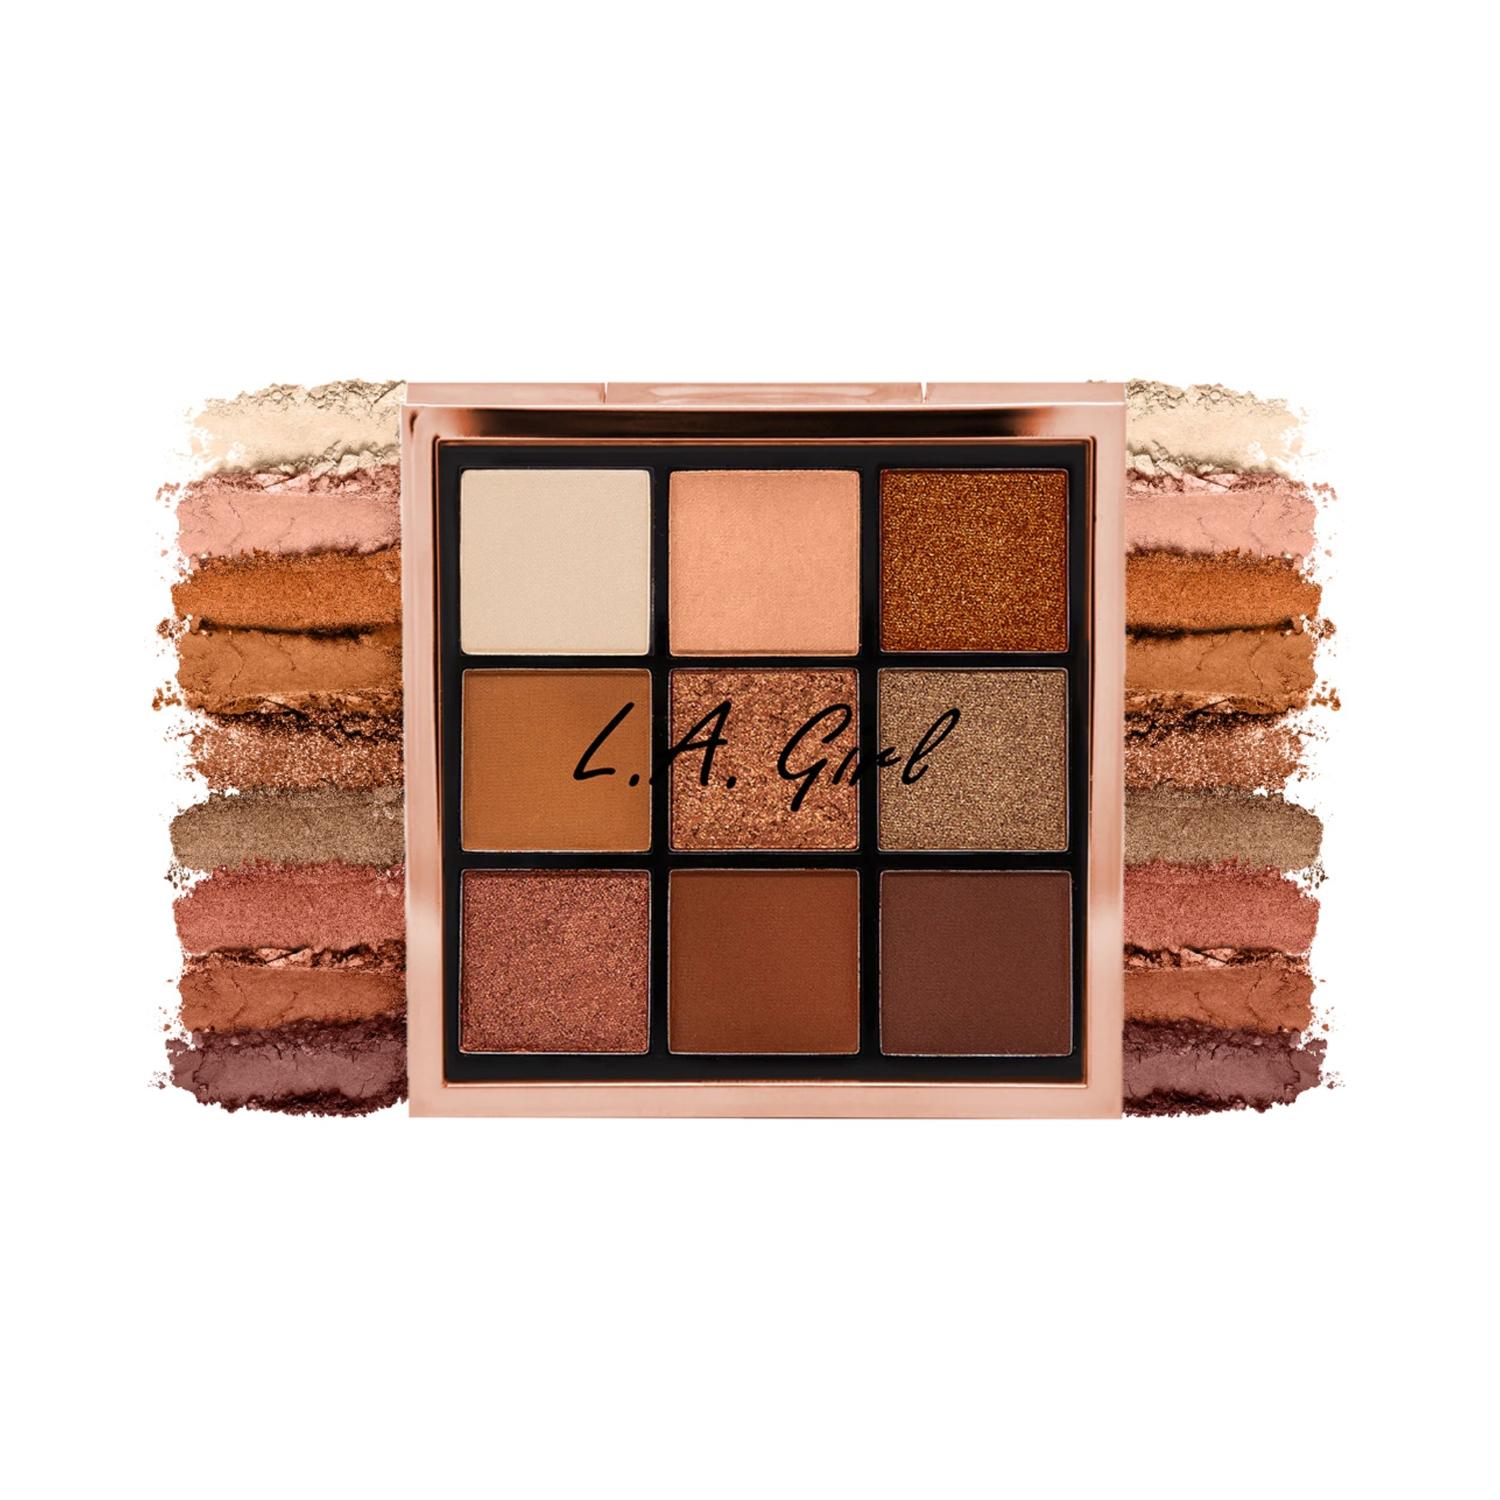 l.a. girl keep it playful 9 color eyeshadow palette - ges435 foreplay (14g)